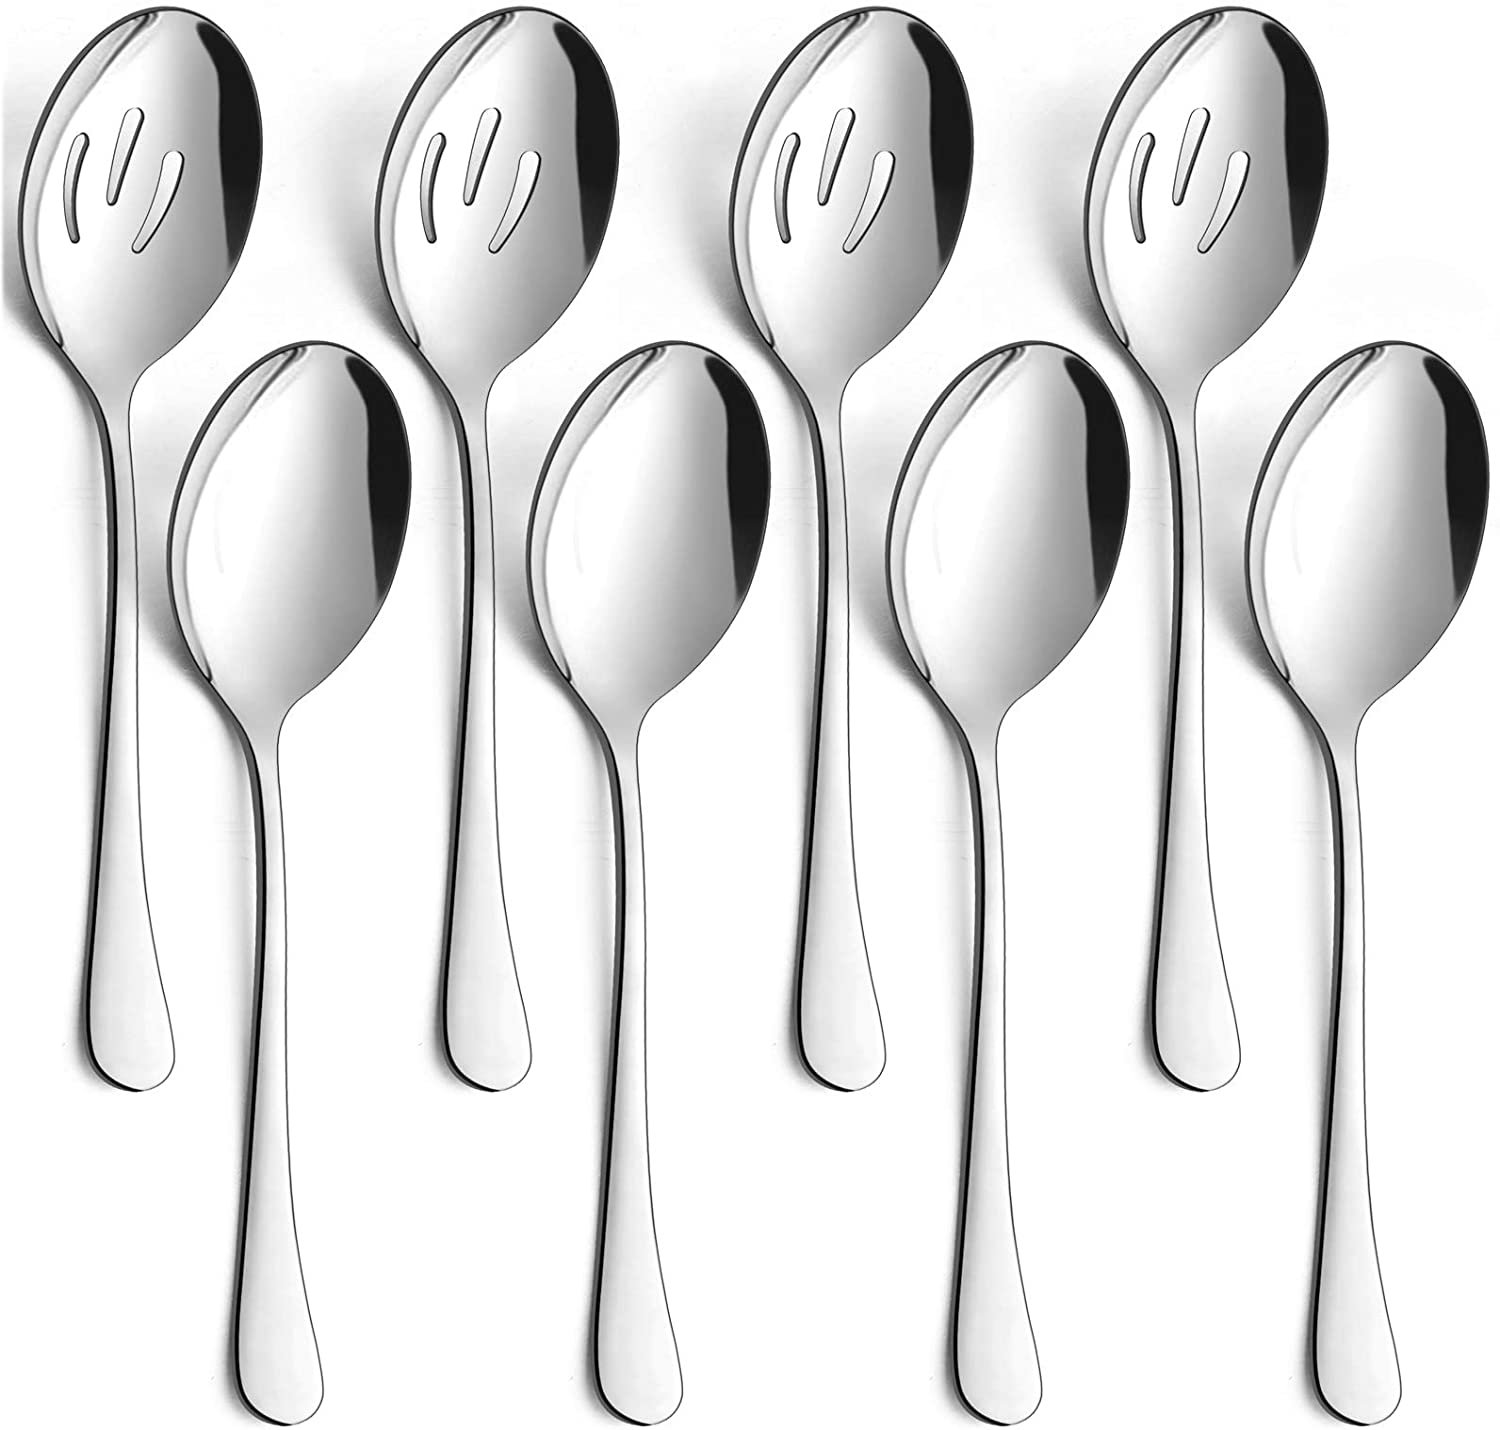 8 Pack Stainless Steel Serving Spoon Set Serving Spoon 4 Slotted Mirror Polished 